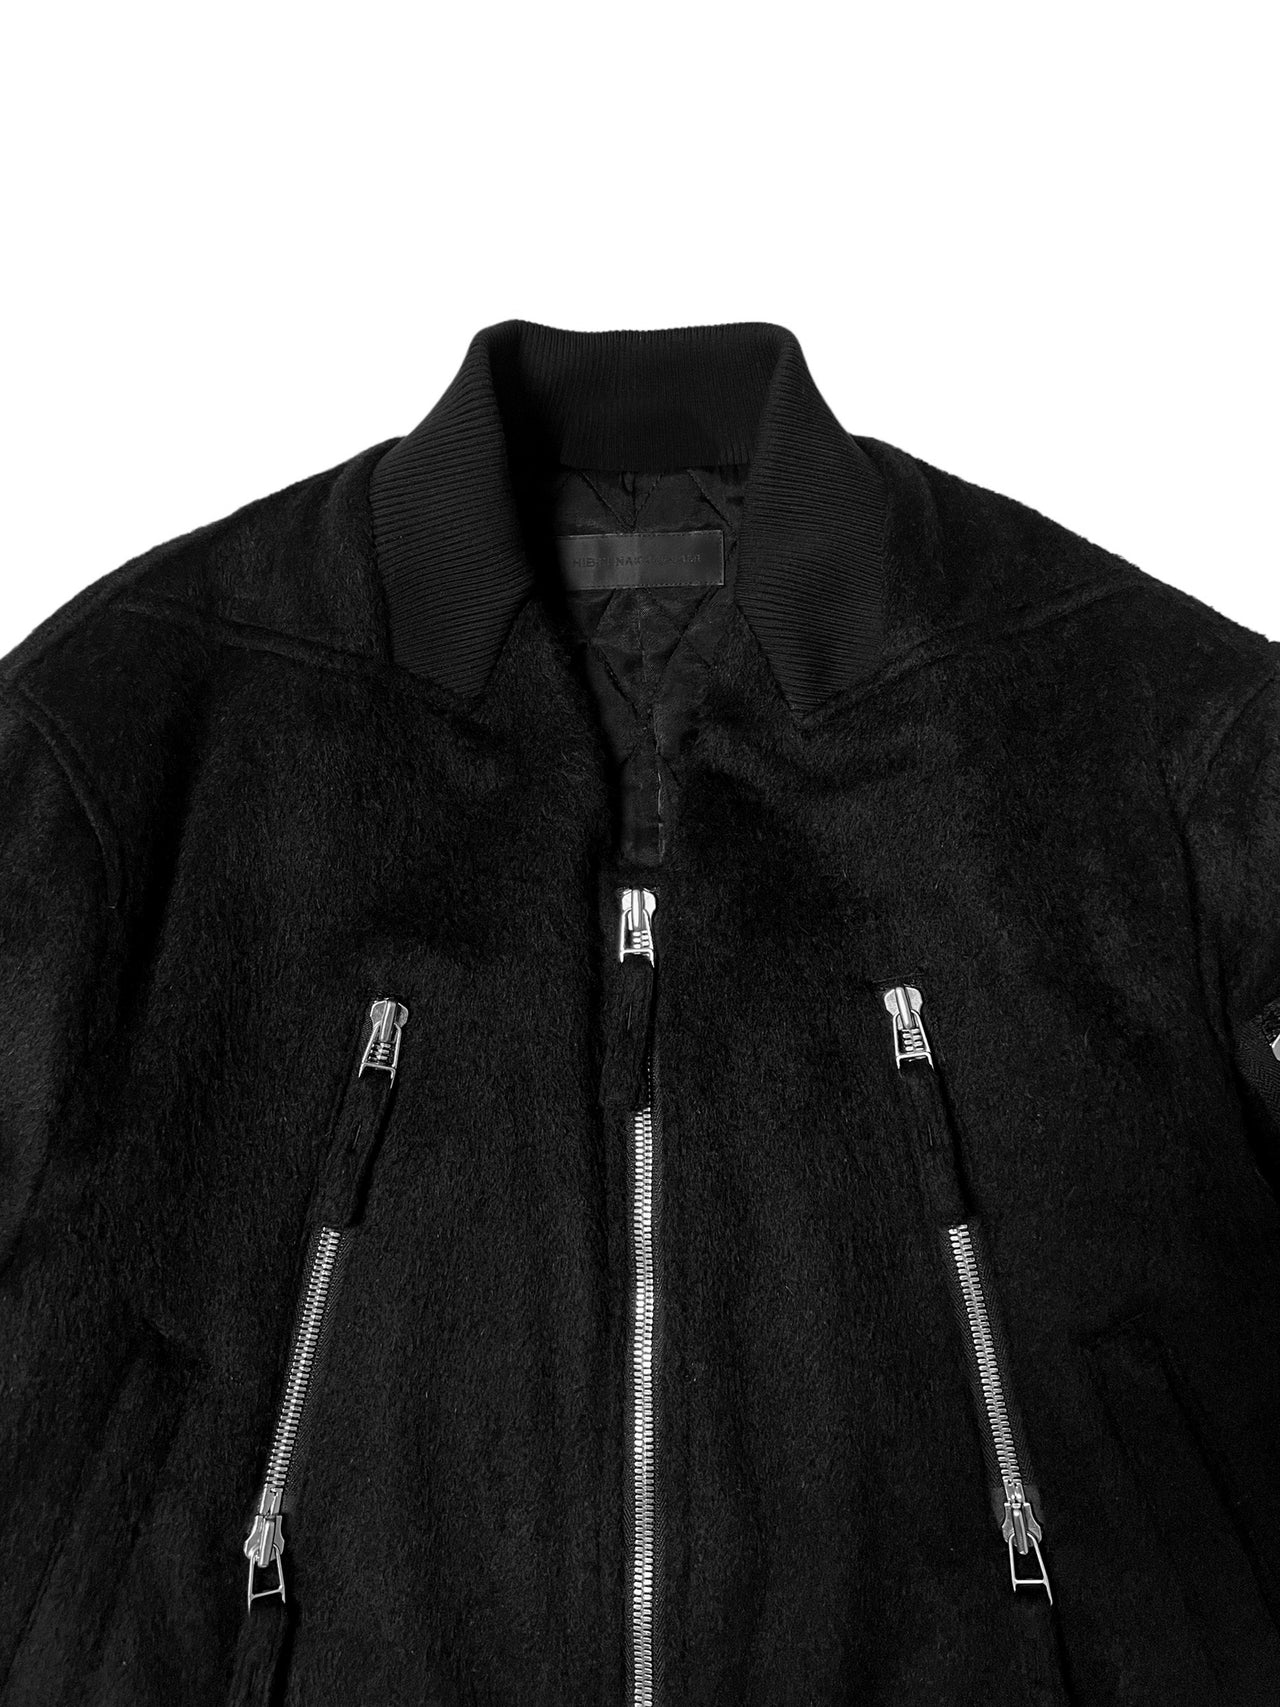 LUCAS / TAILORED COLLAR BOMBER in BLACK - MOHAIR WOOL SHAGGY【PREORDER】